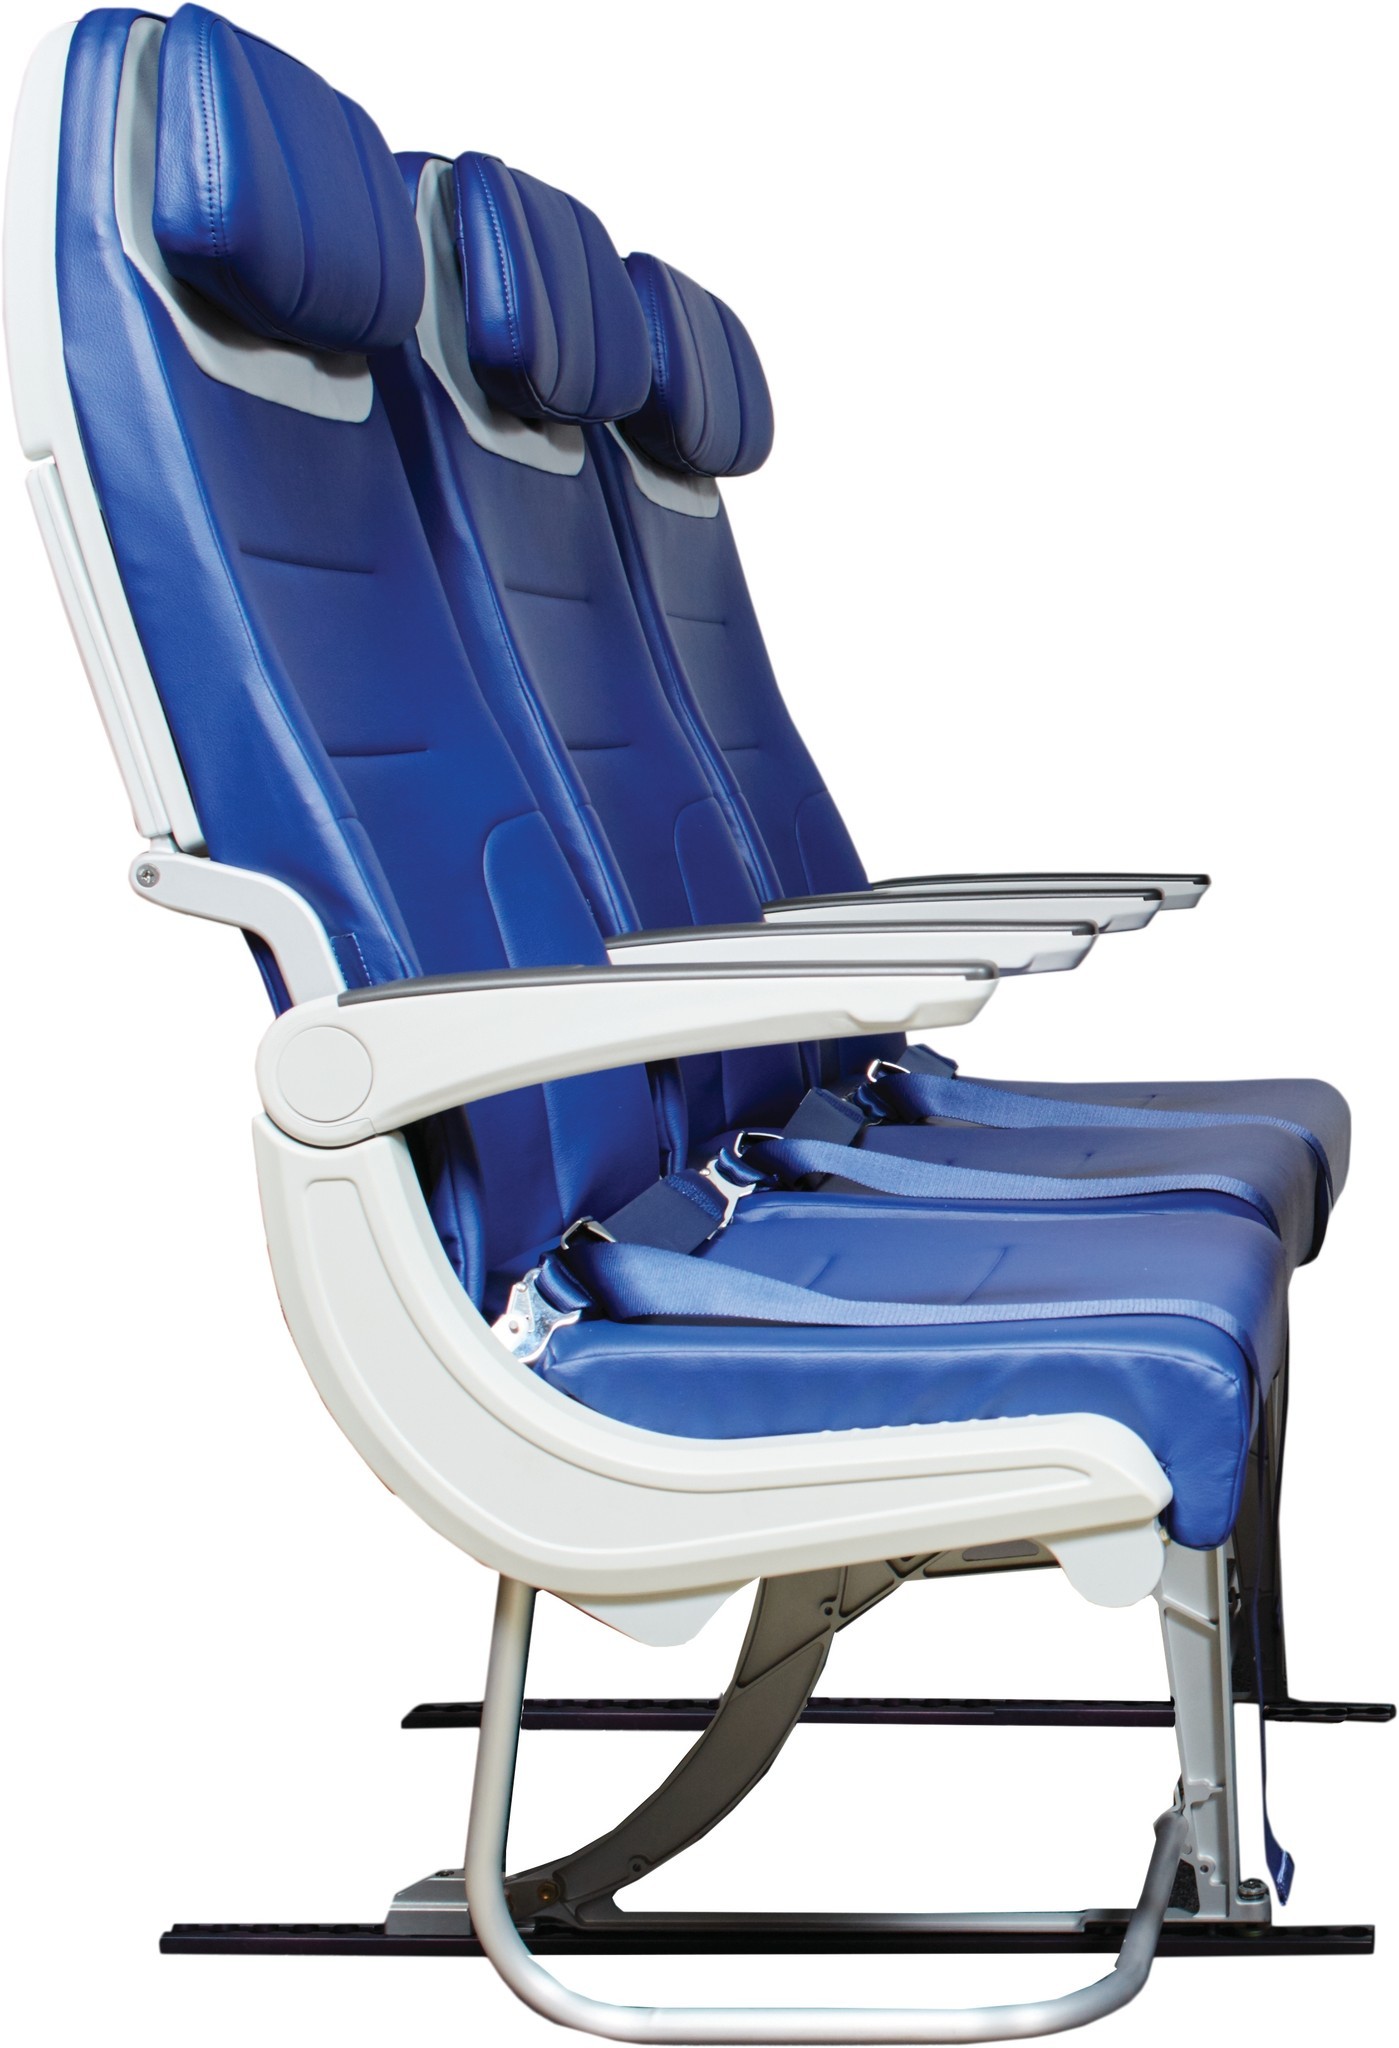 airplane seat clipart - photo #30